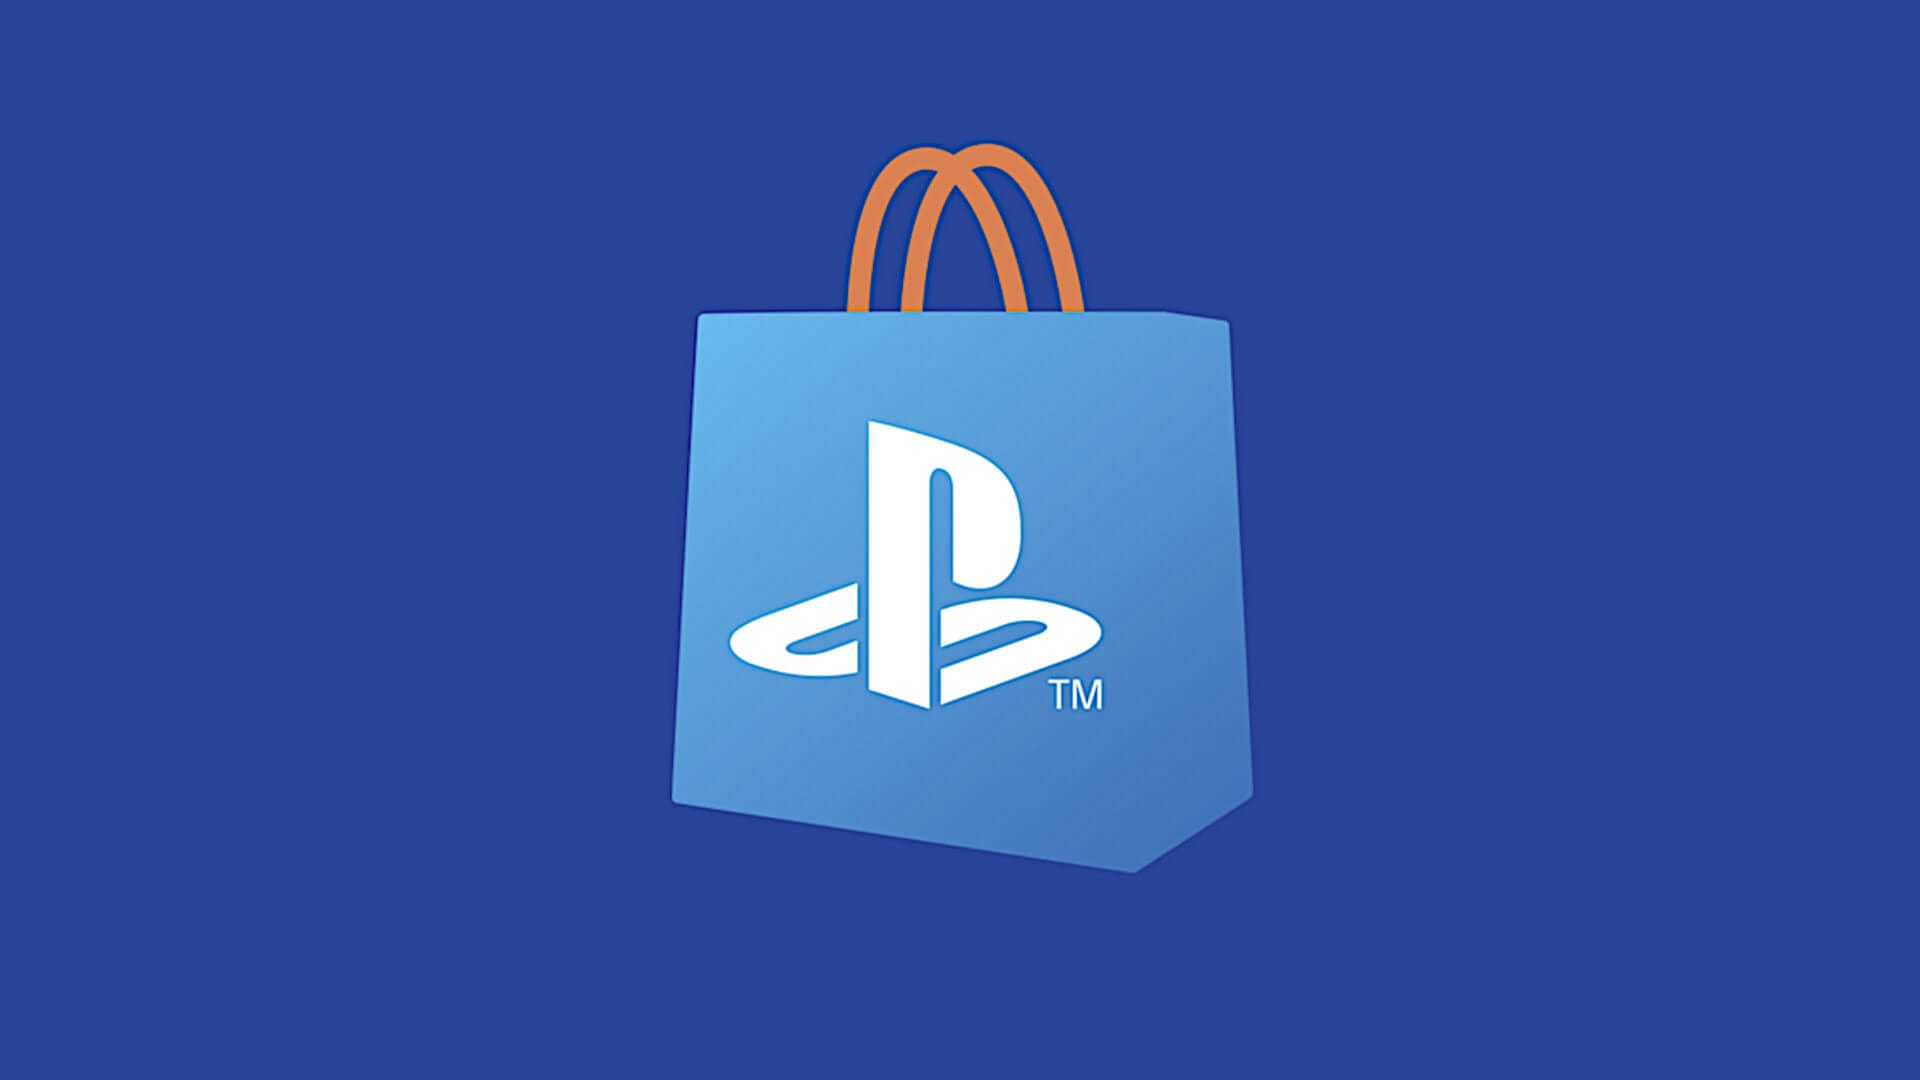 The PlayStation Store logo against a blue background